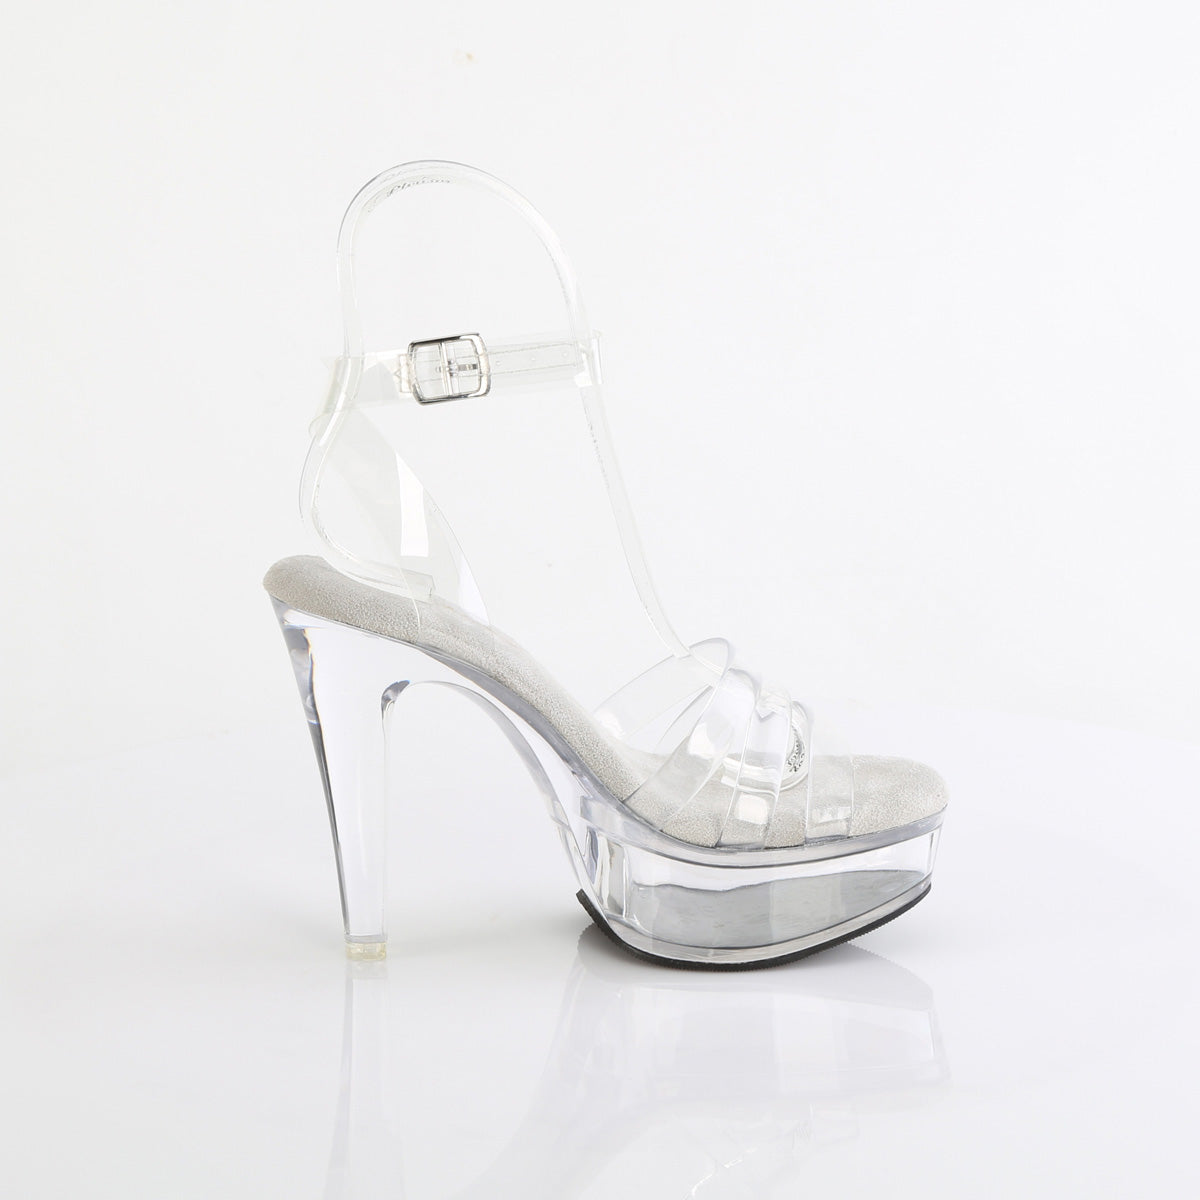 MARTINI-505 Wrap Around Ankle Strap Sandal Clear Multi view 2